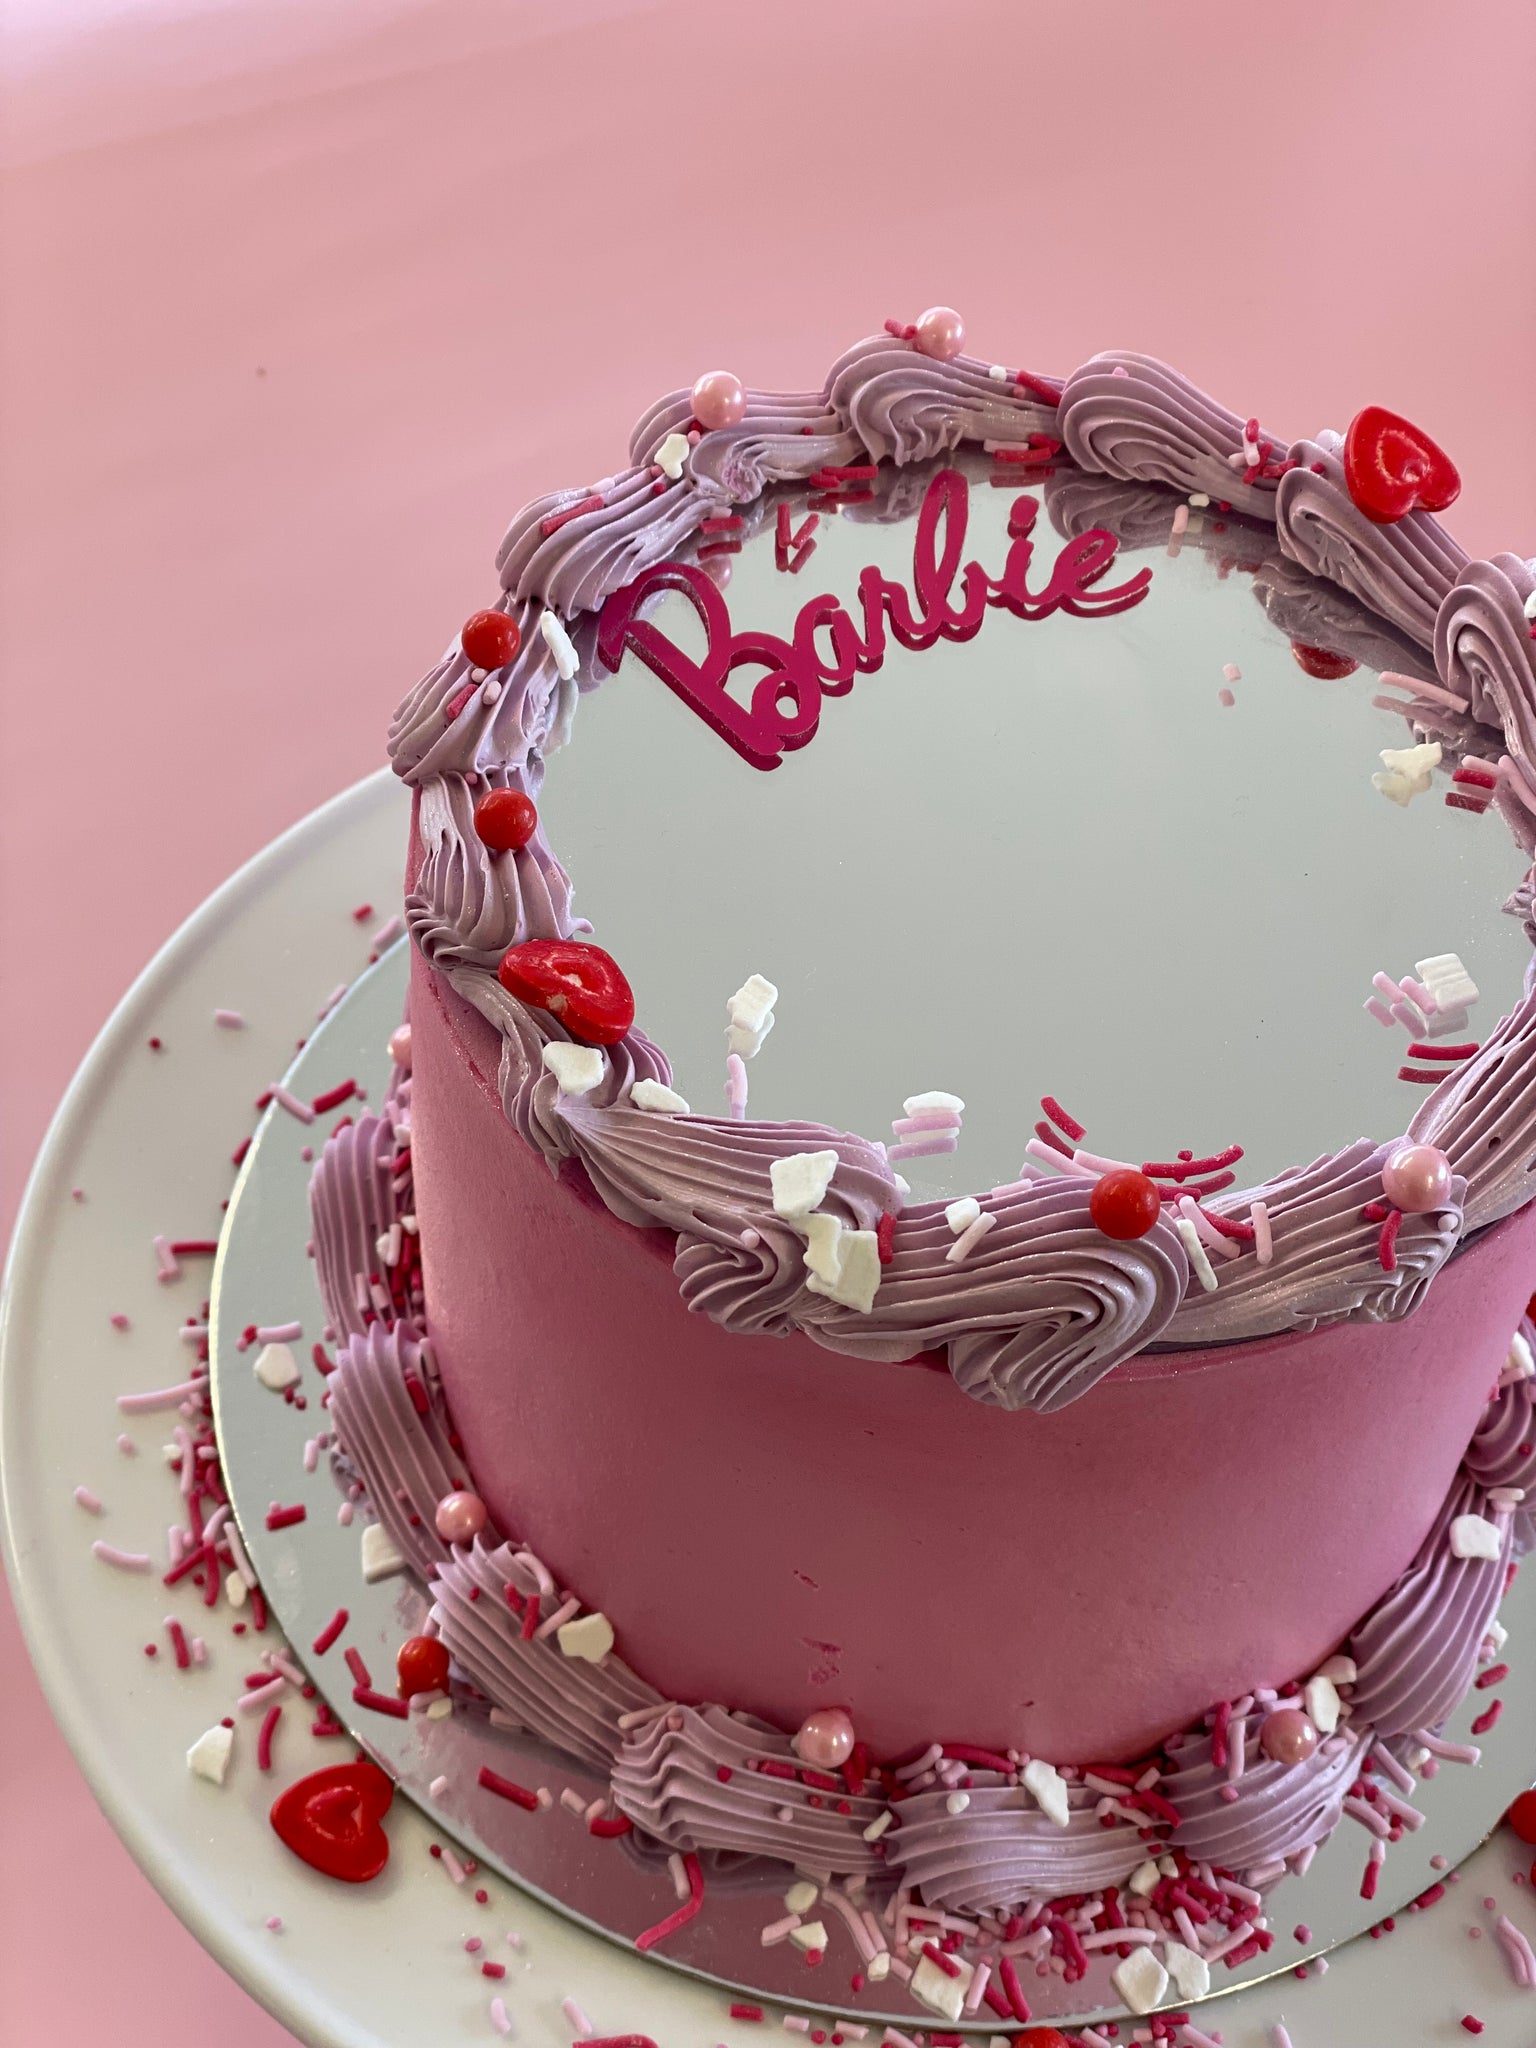 Dropping some Barbie love here! ✨My Barbie cake was featured in @eater  today in celebration of the big movie debut you may have heard a... |  Instagram